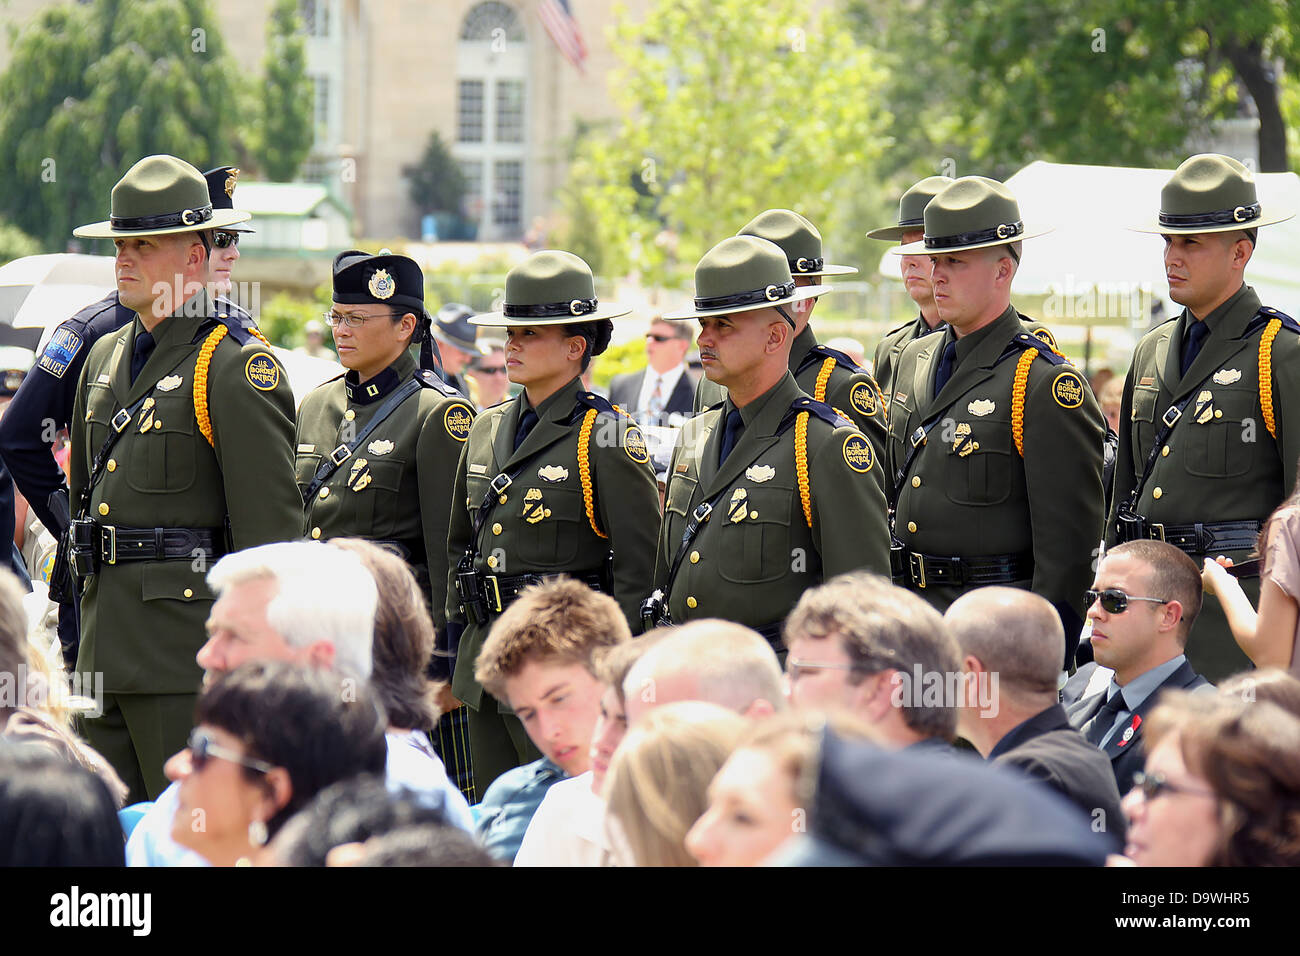 Polizei Woche 2013 32. National Peace Officers Memorial Service. Stockfoto